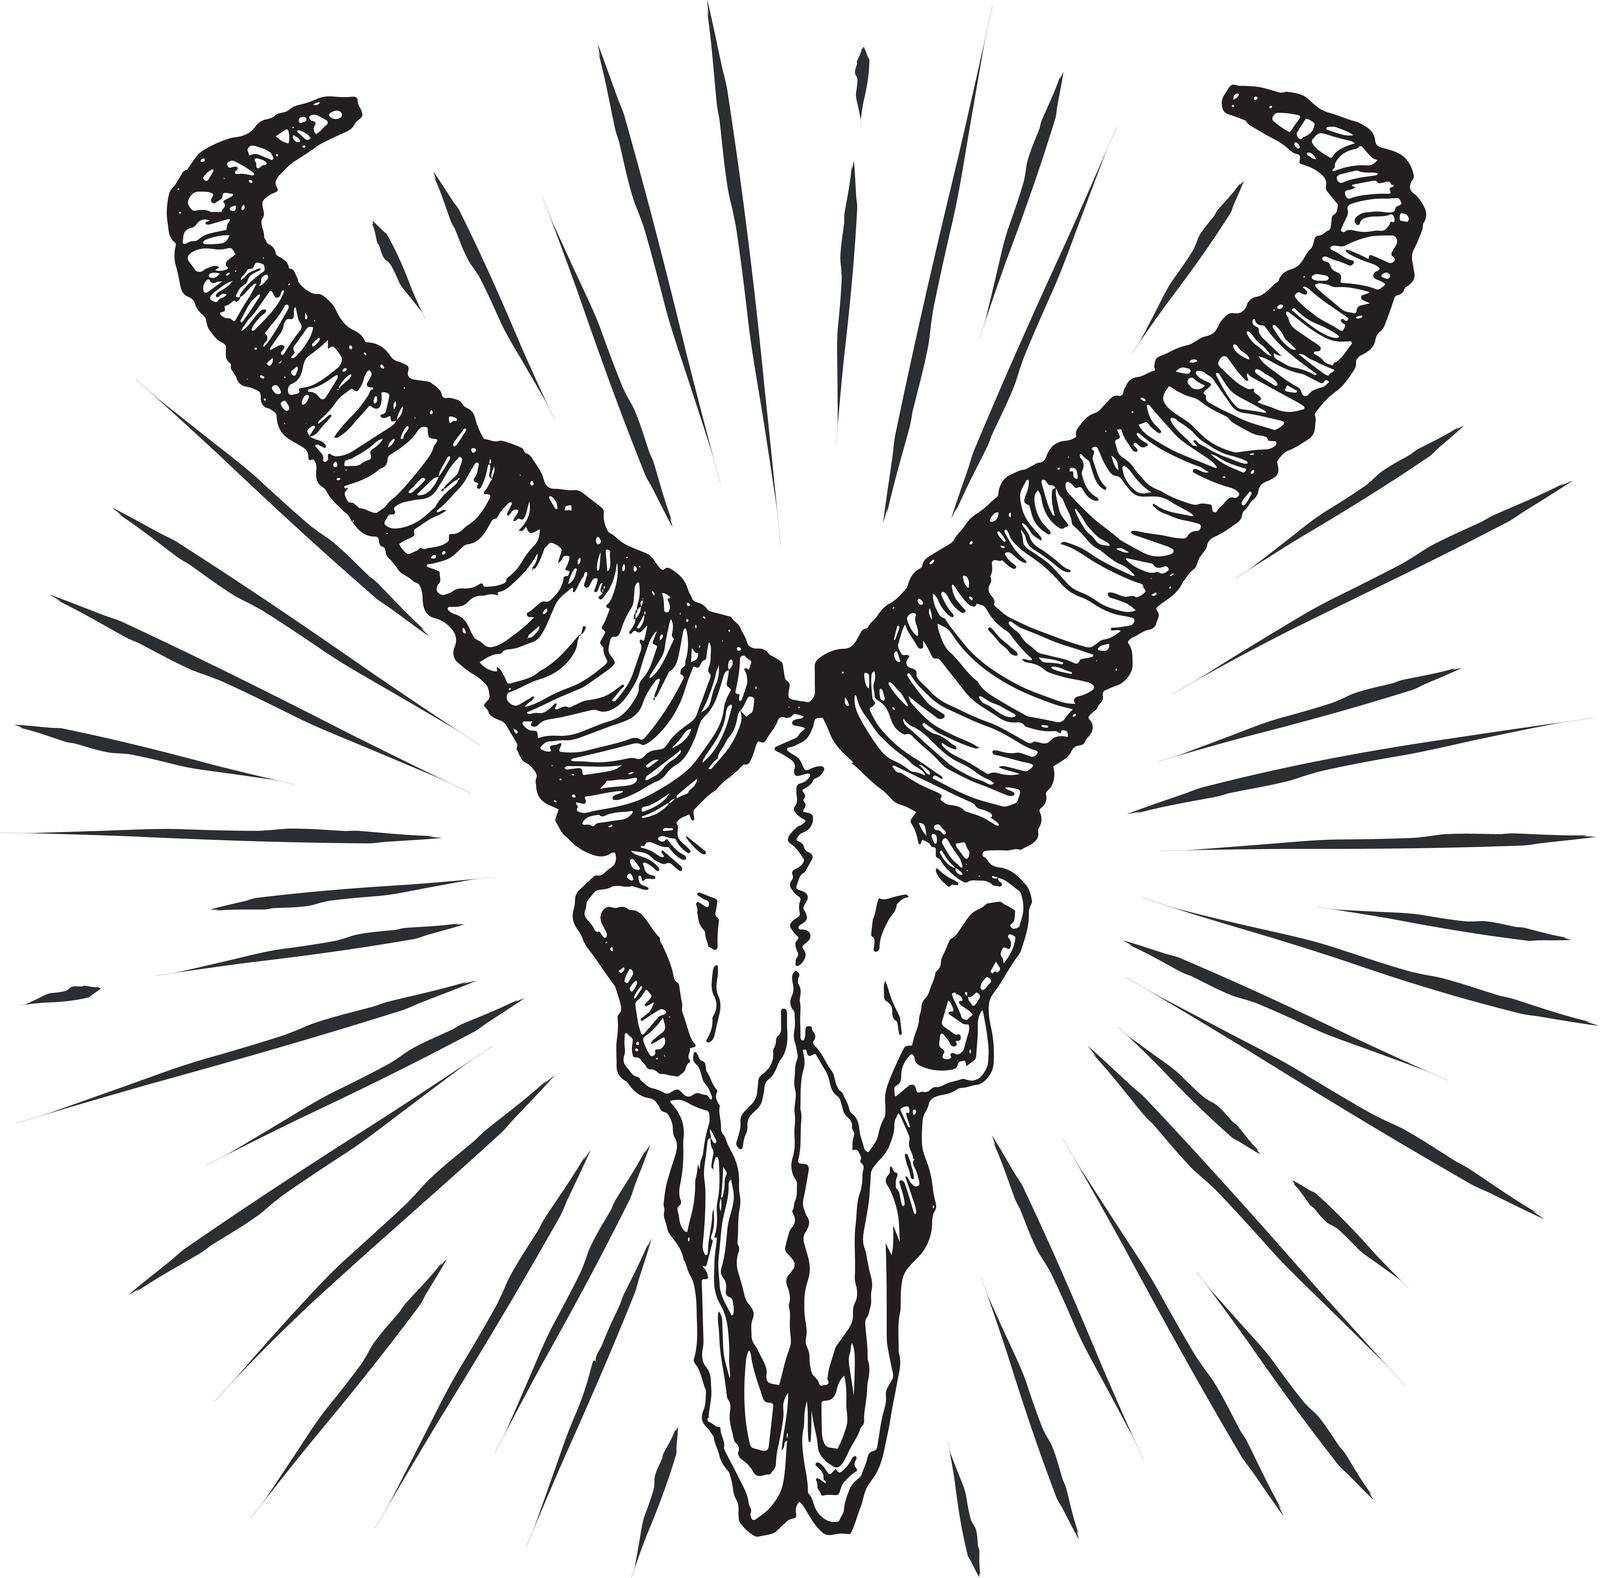 Skull of a goat with straight horns. Hand drawn sketch vector illustration.